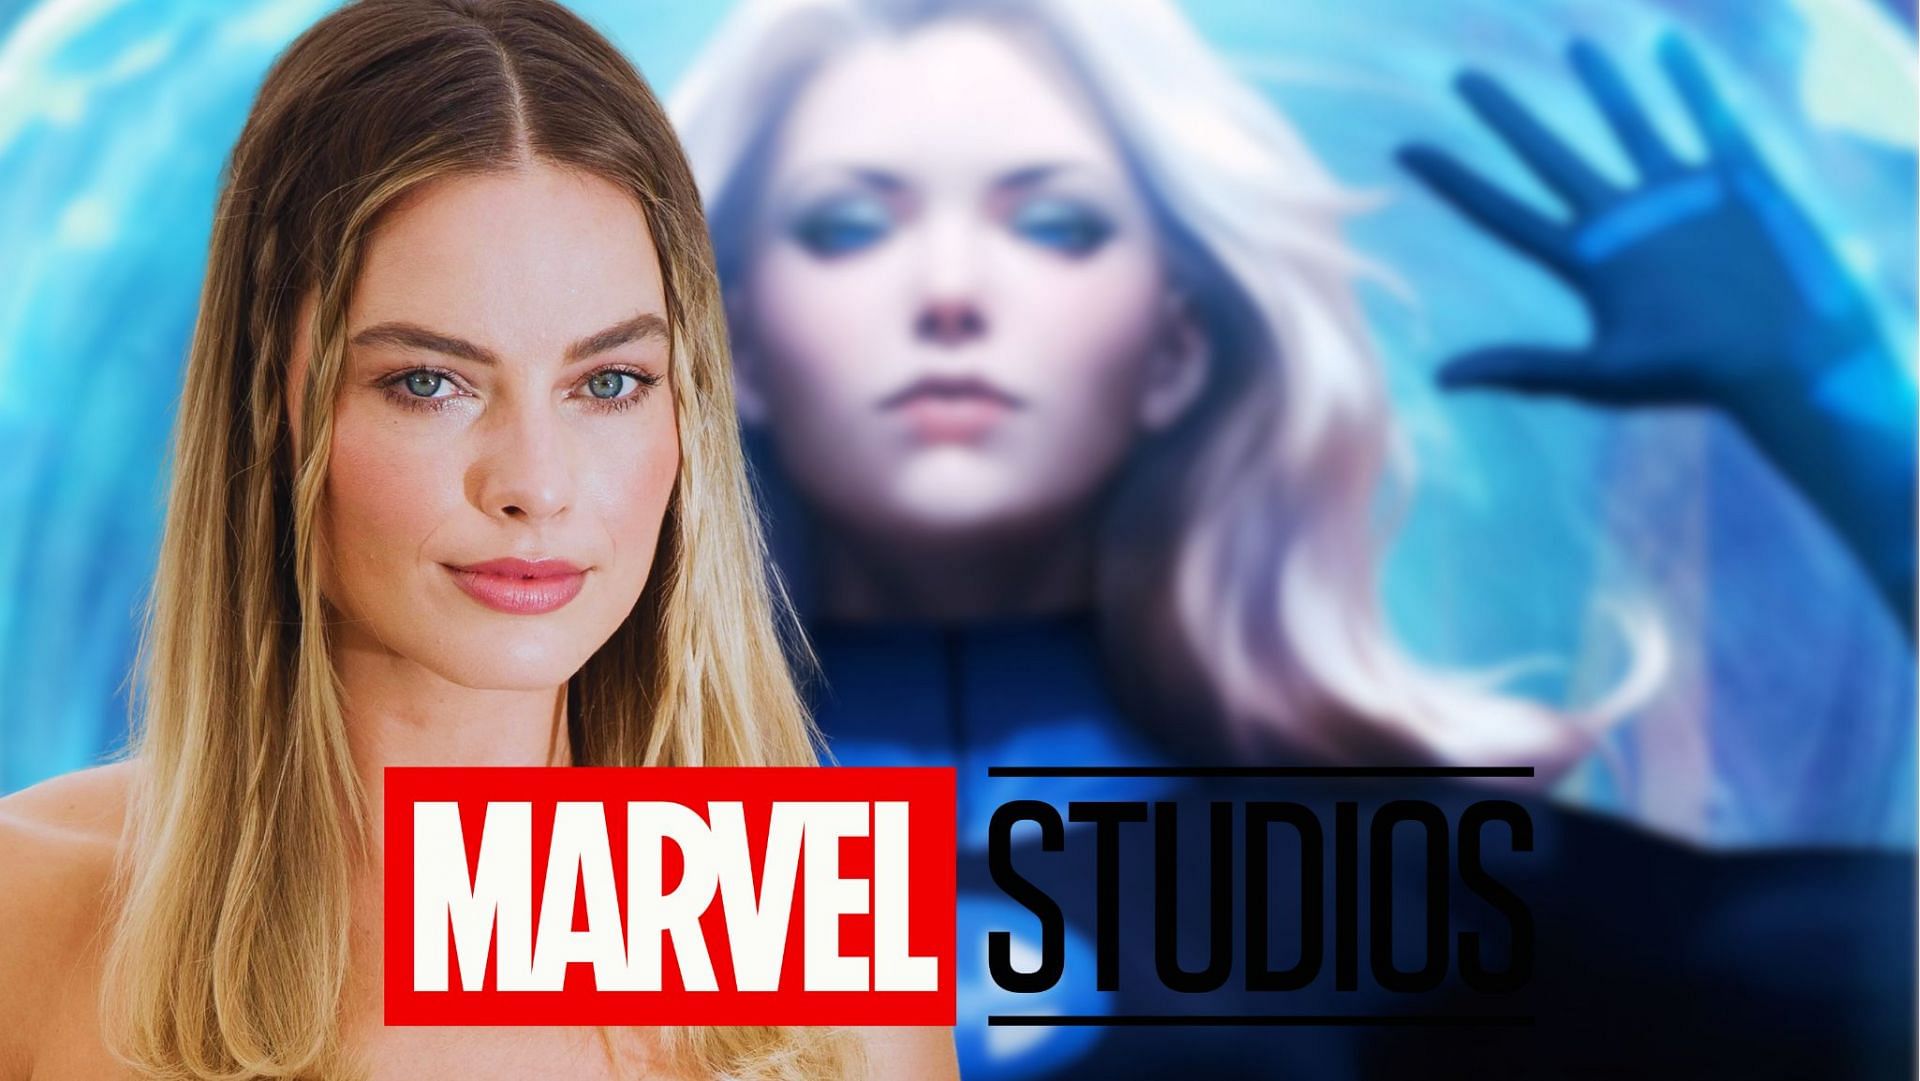 Margot Robbie is reportedly being considered for the role of Sue Storm in Marvel Studios